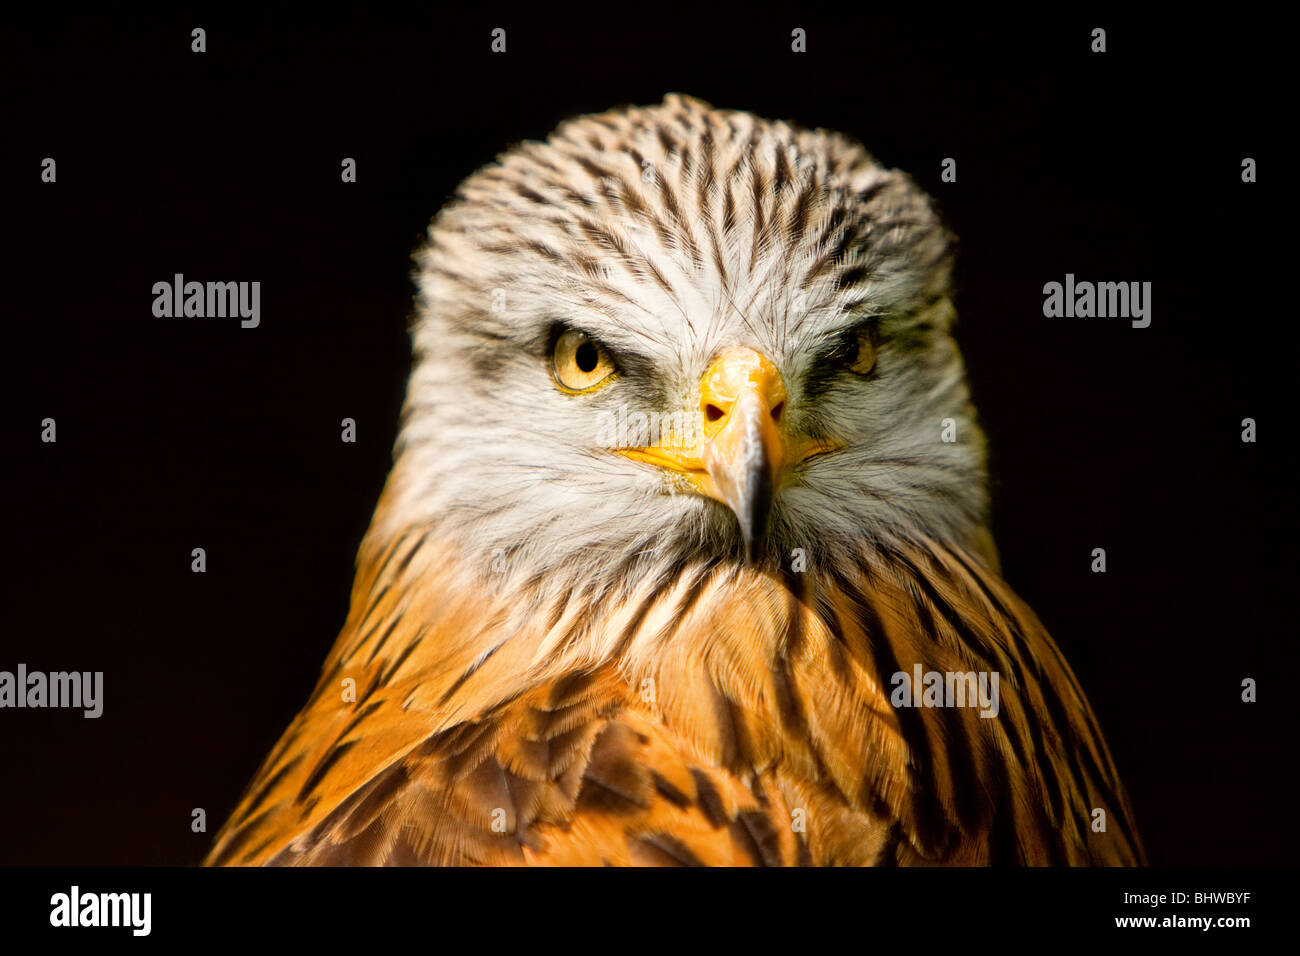 A portrait of a red kite (captive) Stock Photo